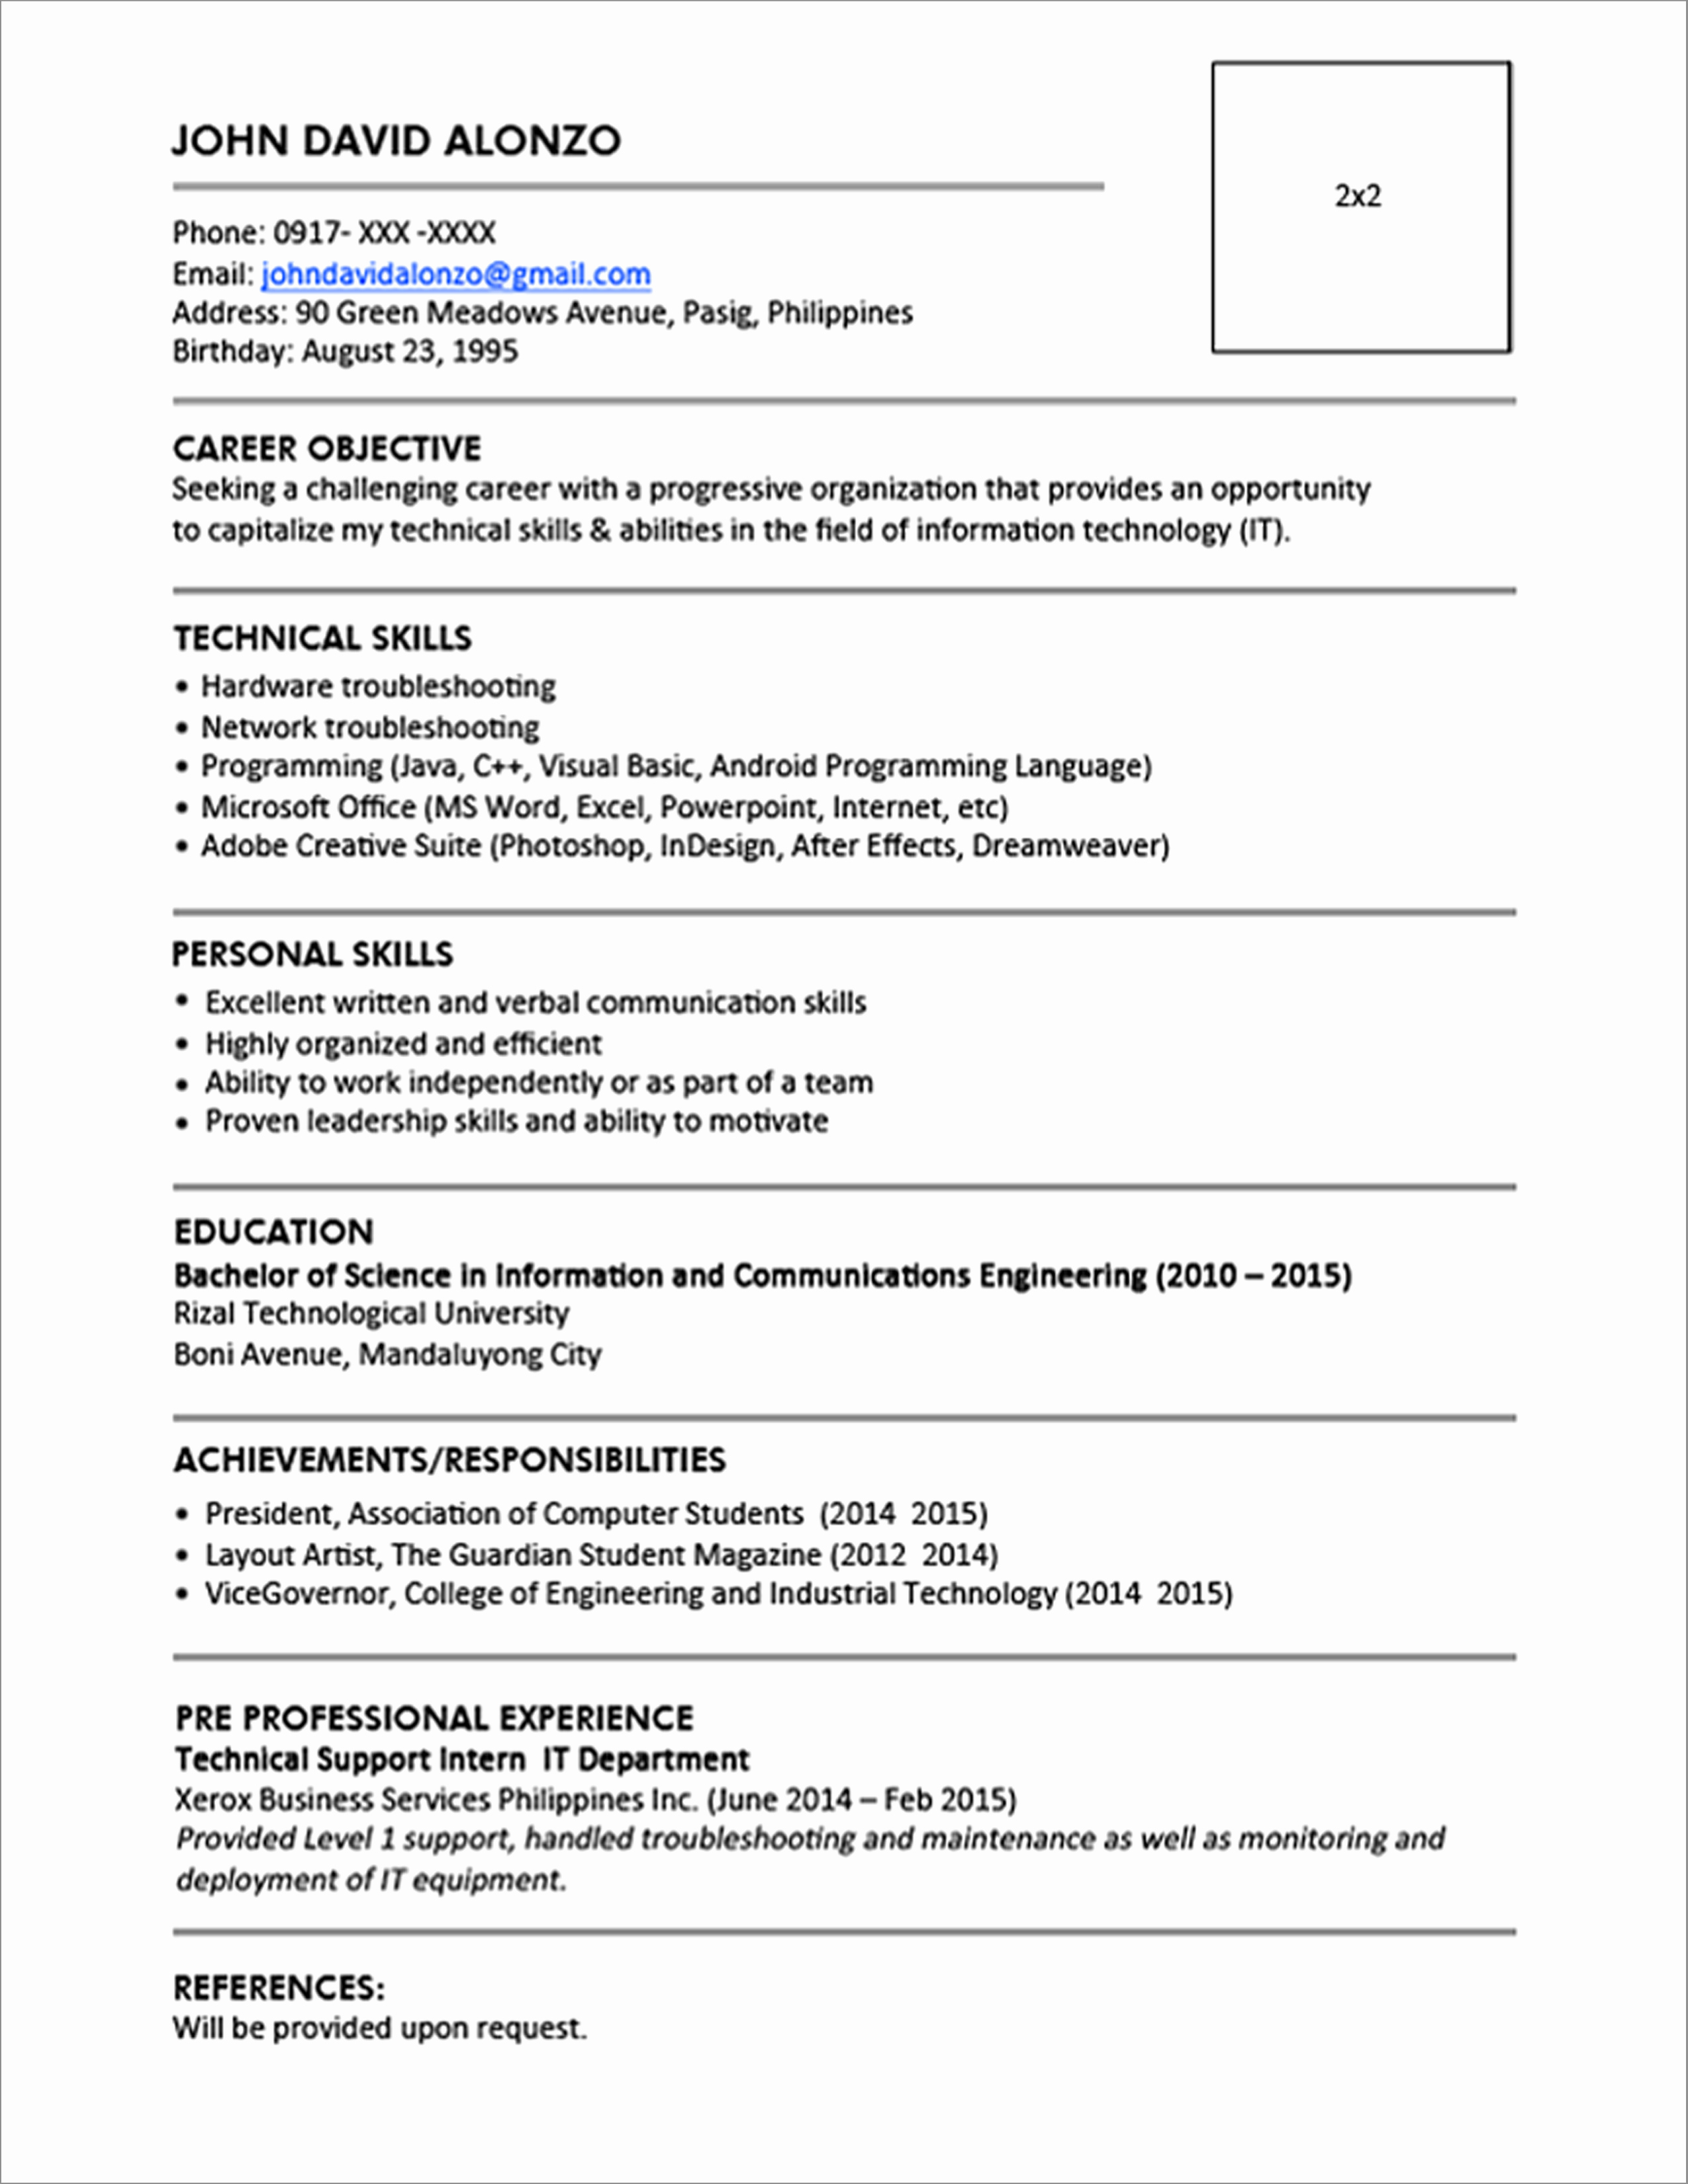 Resume Templates You Can